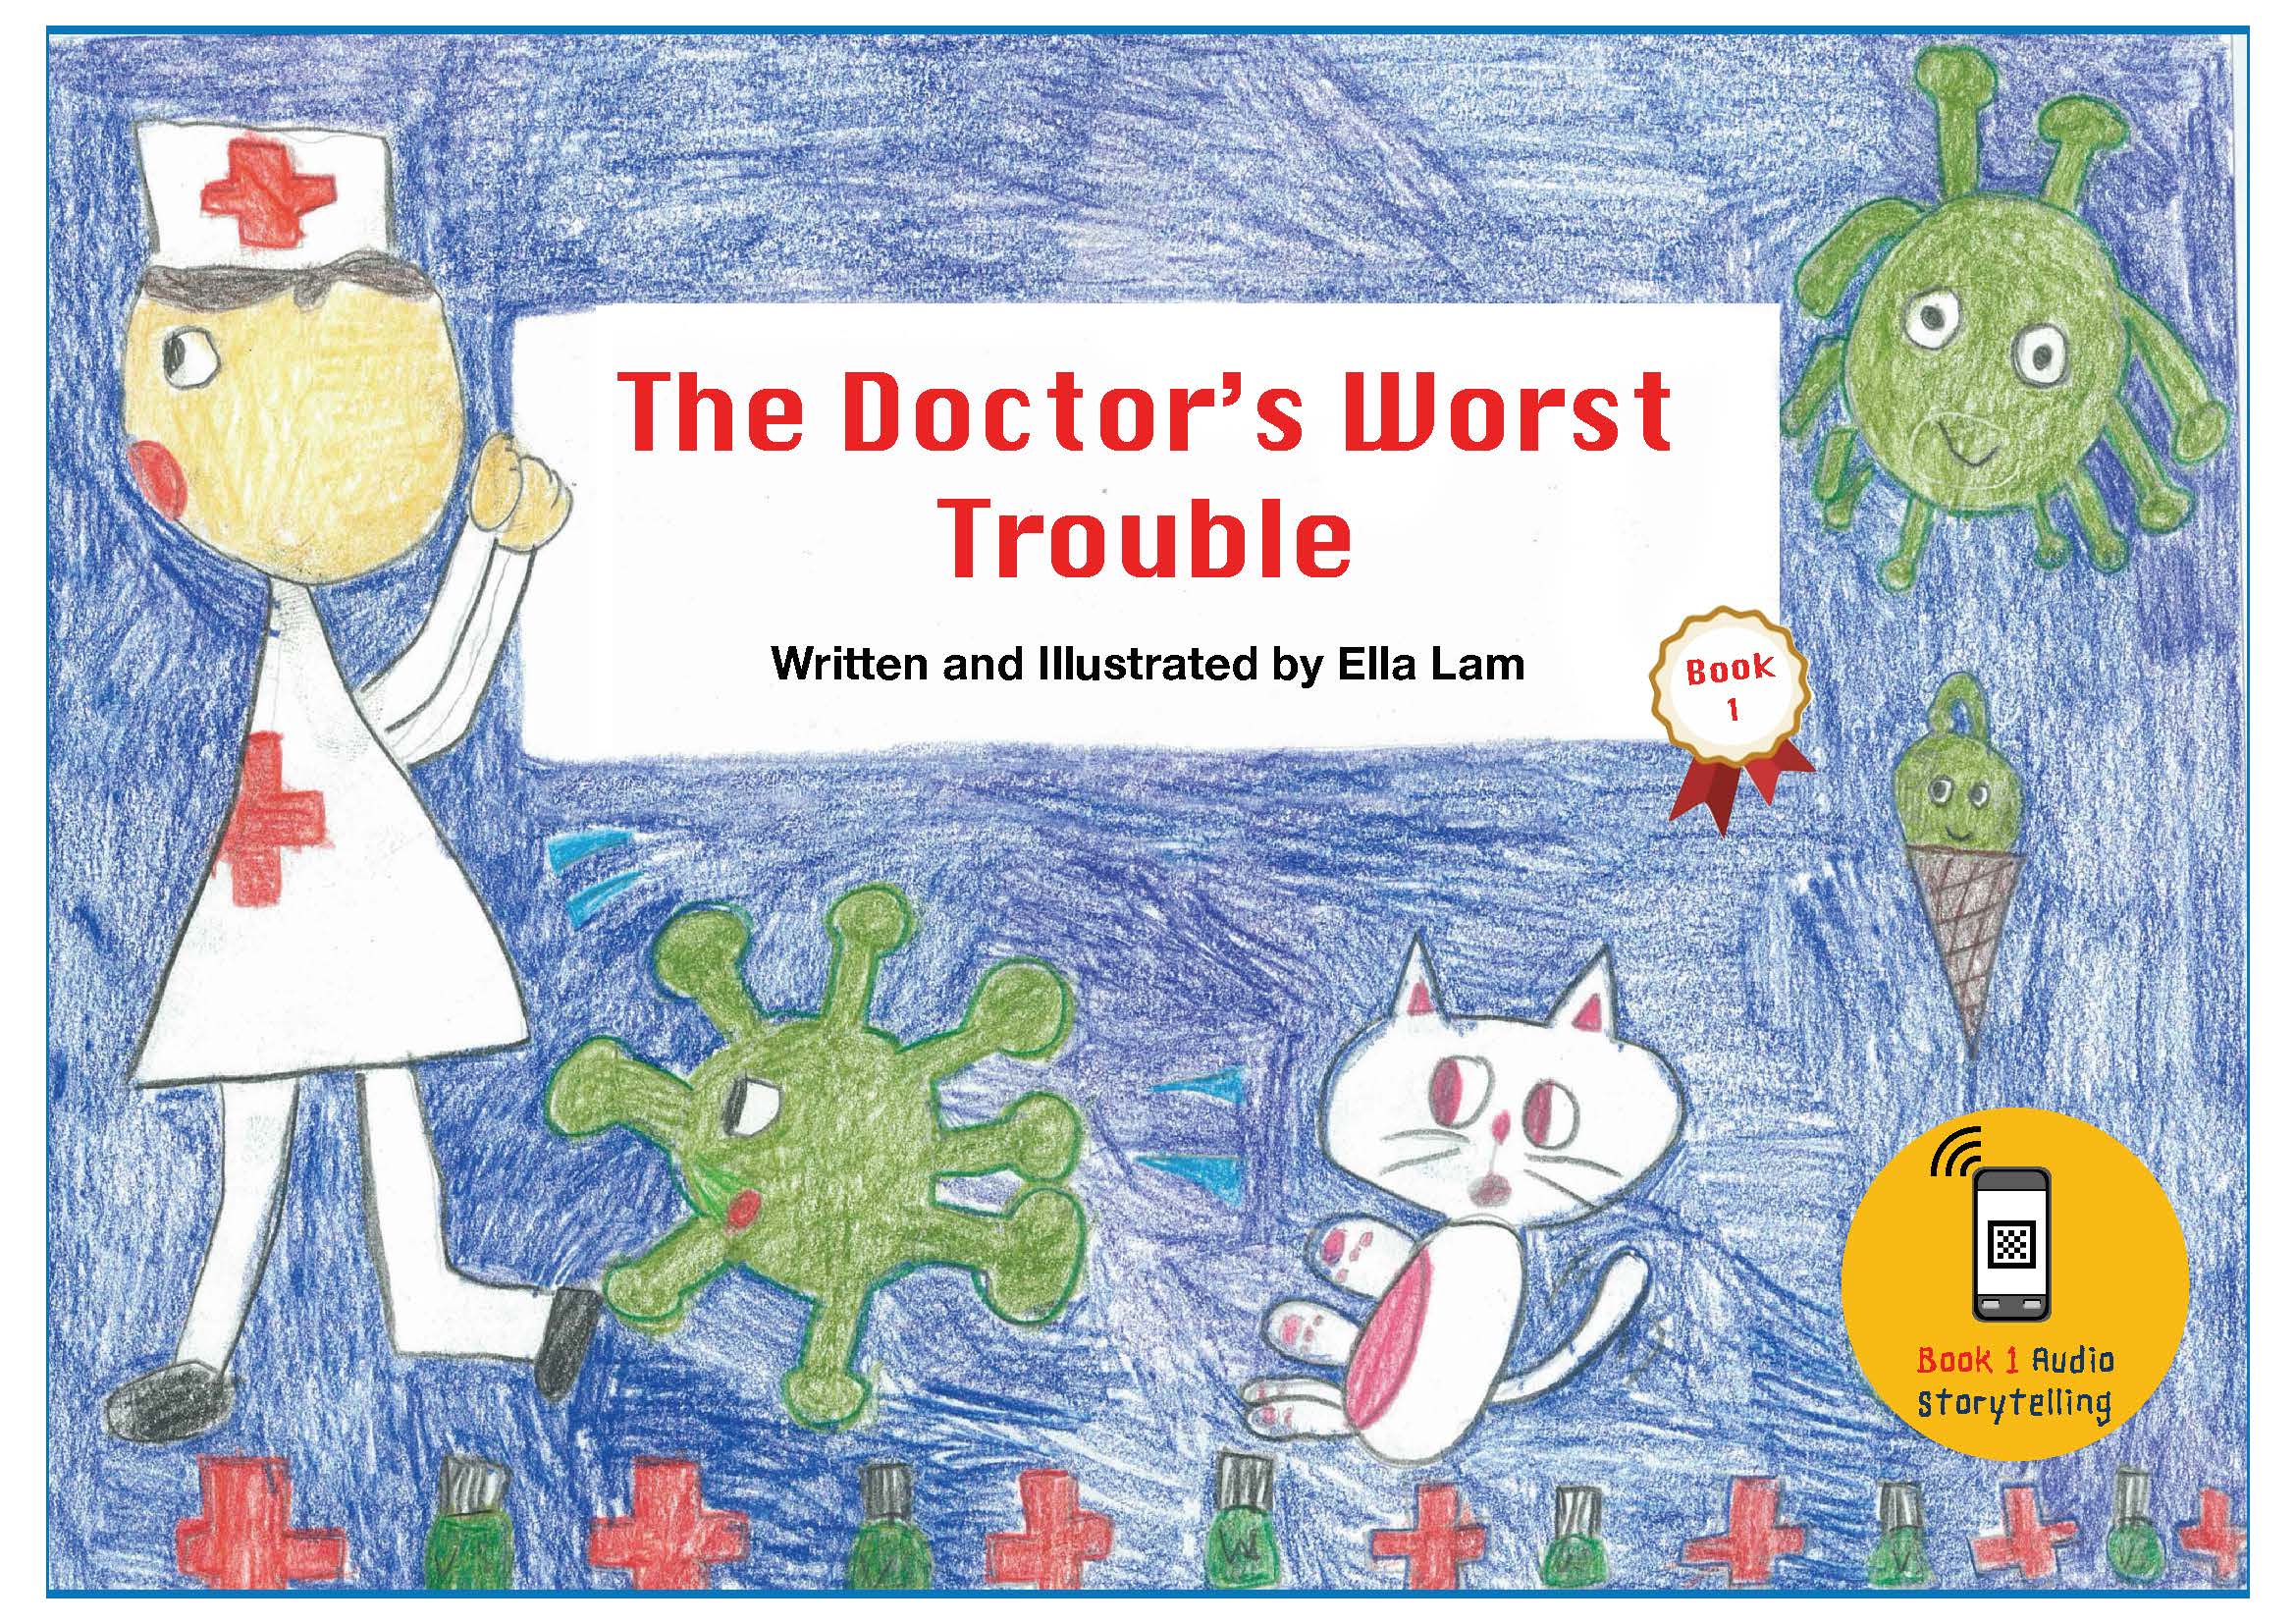 The Doctor's Worst Trouble